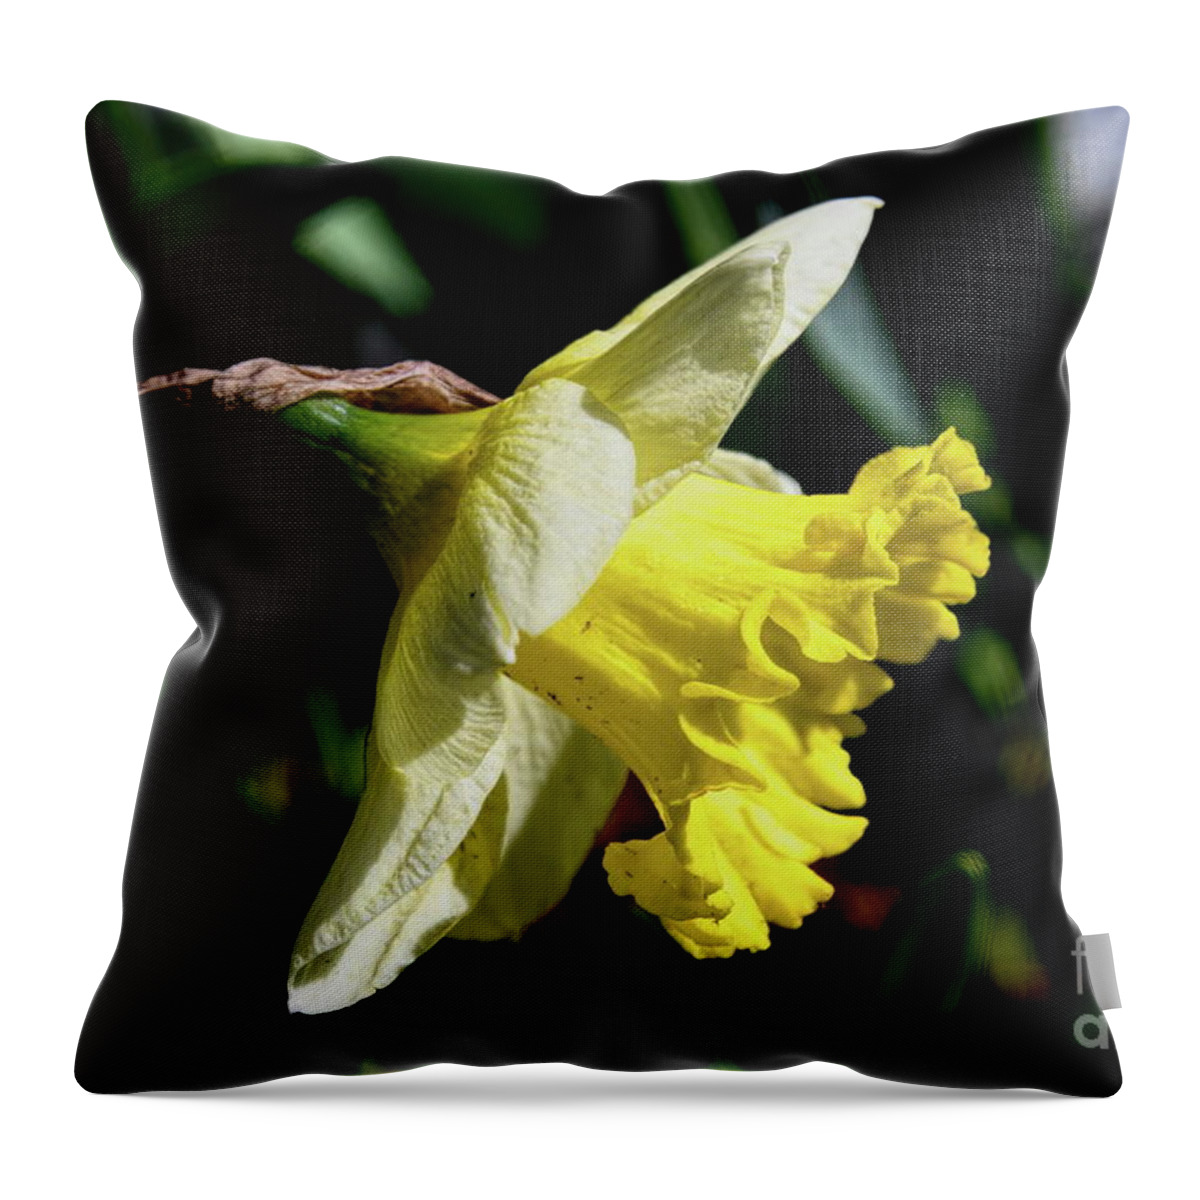 Flower Throw Pillow featuring the photograph Jonquil Daffodil - Side View by Diana Mary Sharpton